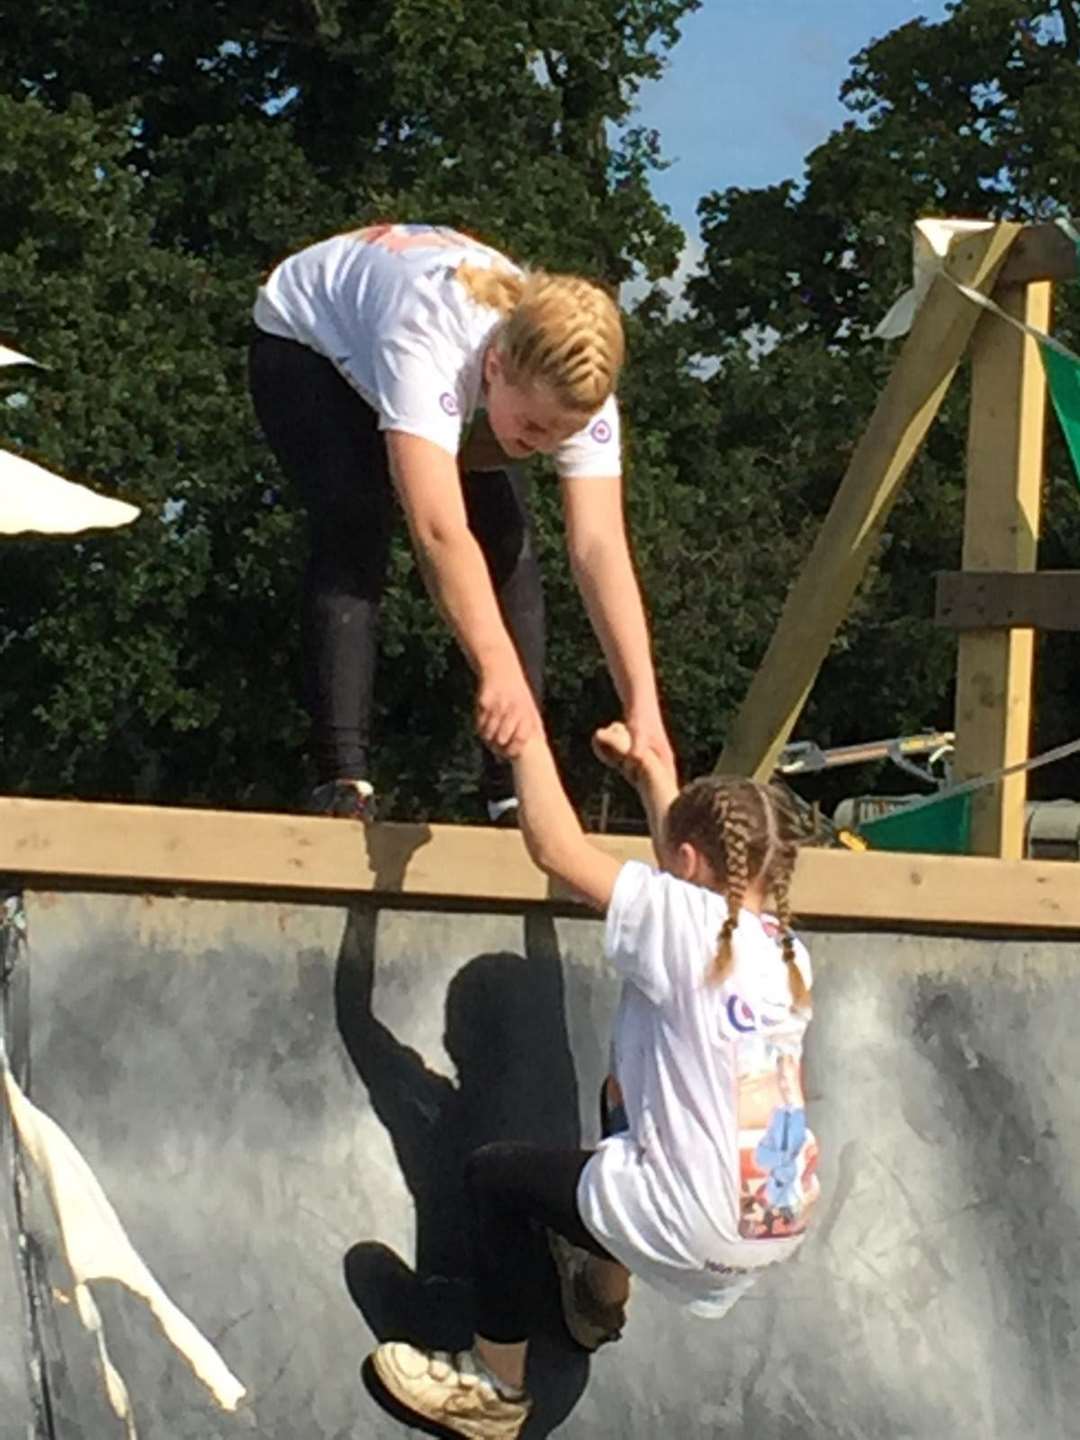 Eryn, 12, helping her sister Brooke, eight, up the final ramp of the Mini Mudder. Picture: RAF Benevelant Fund